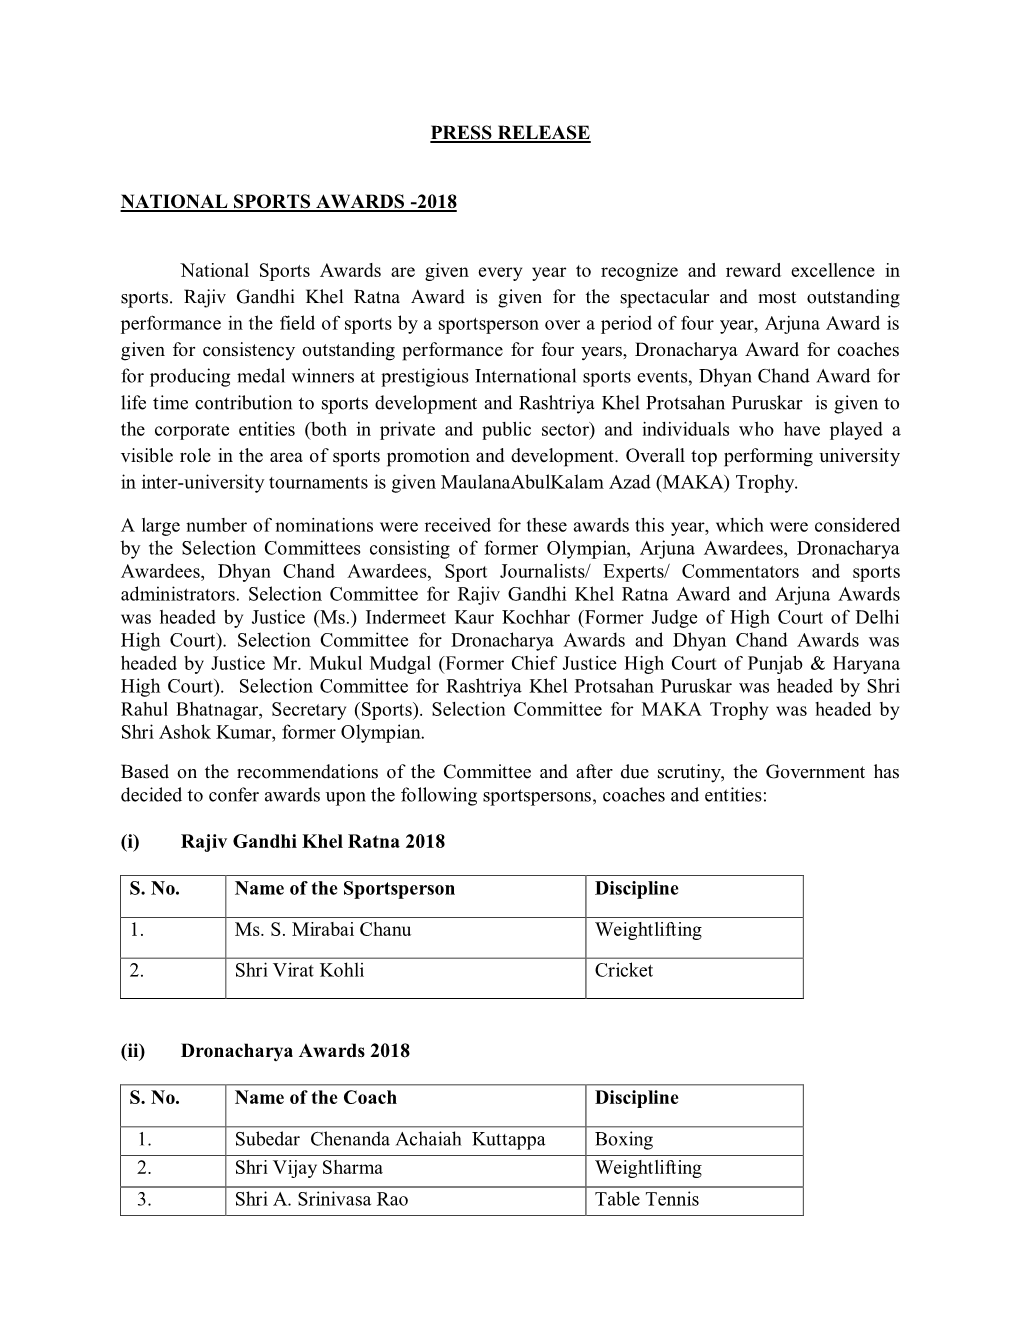 Press Release National Sports Awards